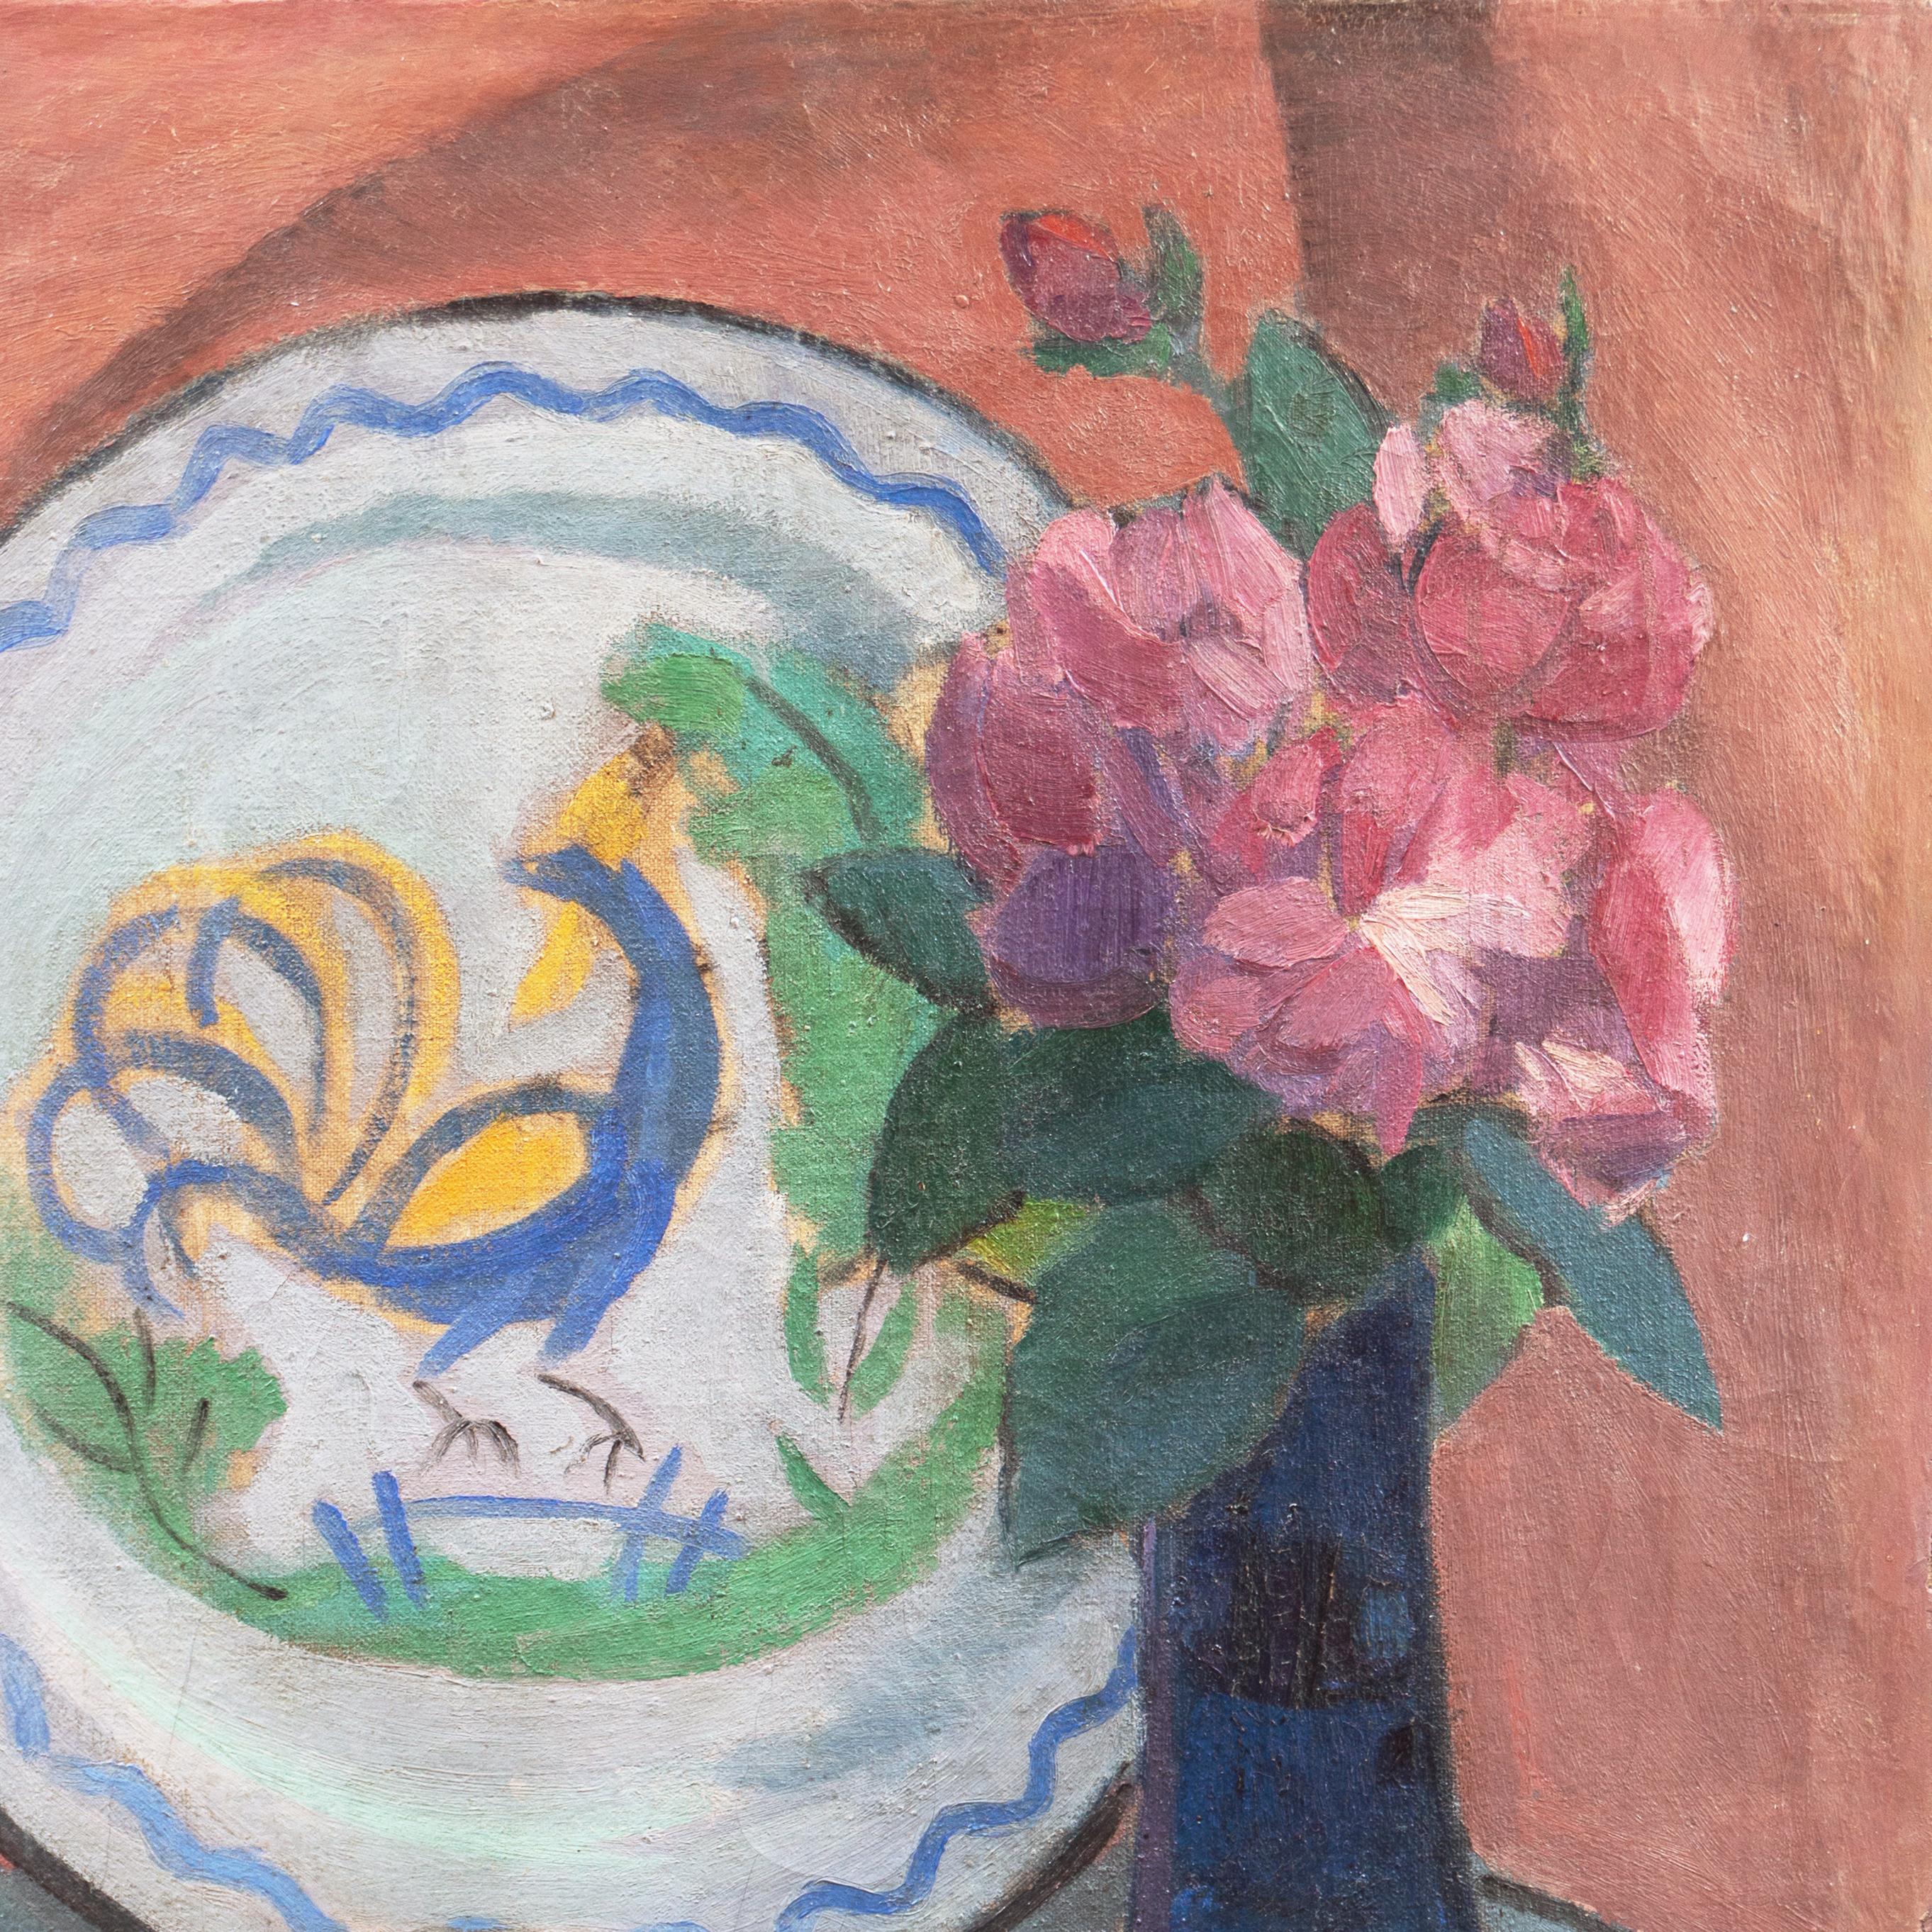 Signed lower right 'Jais' for Jais Nielsen (Danish, 1885-1961) and dated 1913. 

A lyrical, early twentieth-century, Post-Impressionist oil still-life of pink dog-roses shown loosely arranged in a cobalt blue glass vase resting on a turquoise